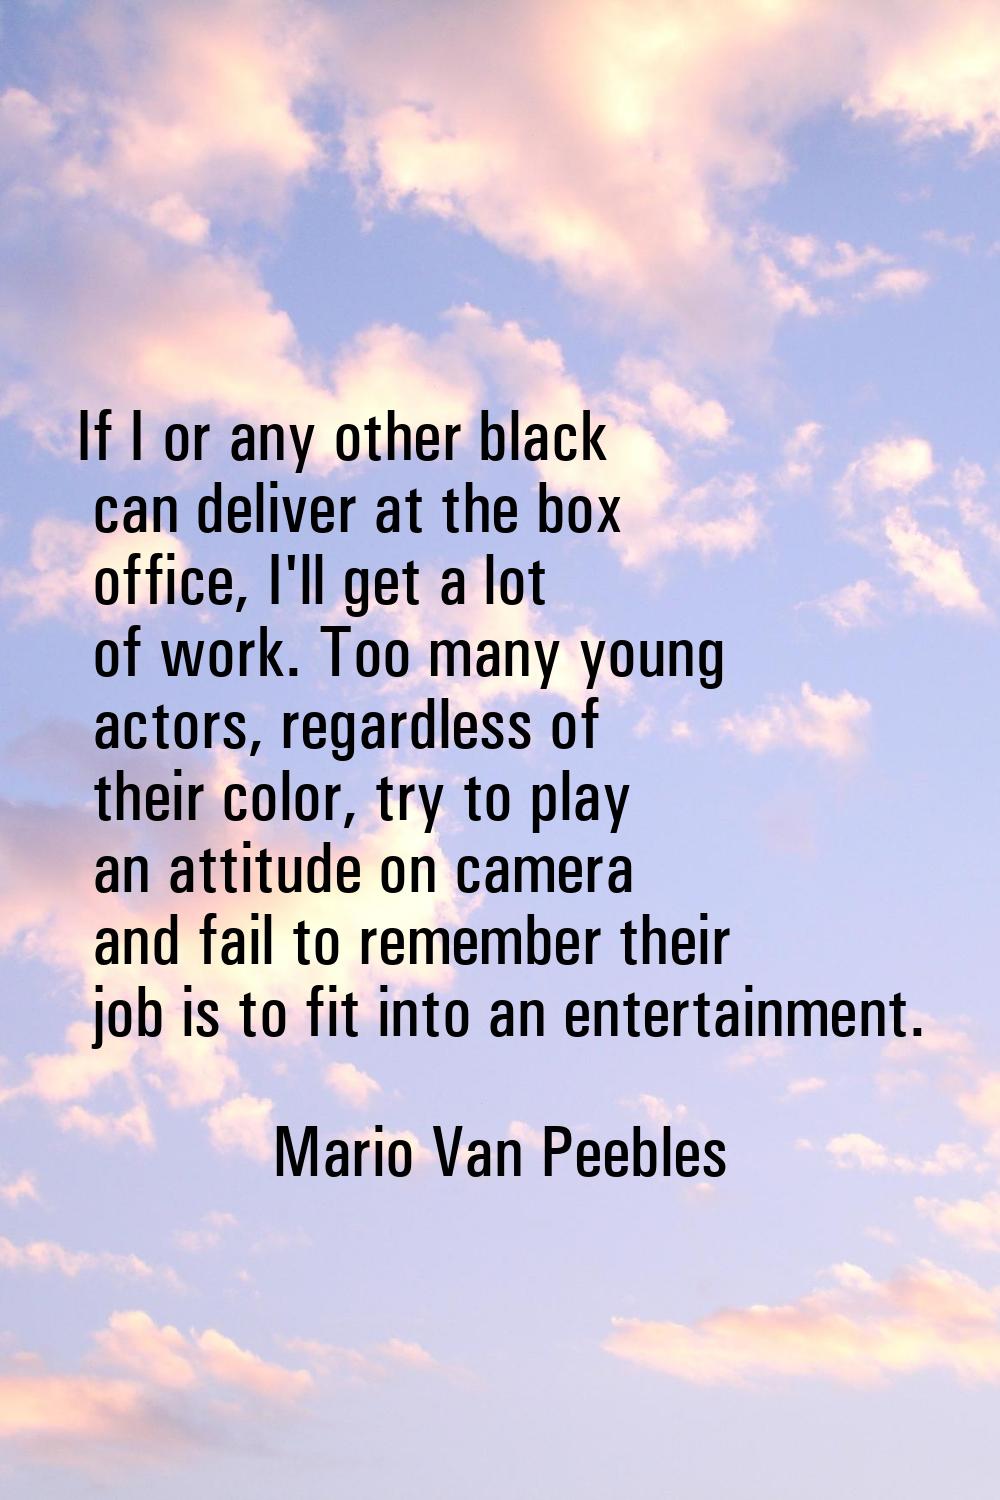 If I or any other black can deliver at the box office, I'll get a lot of work. Too many young actor